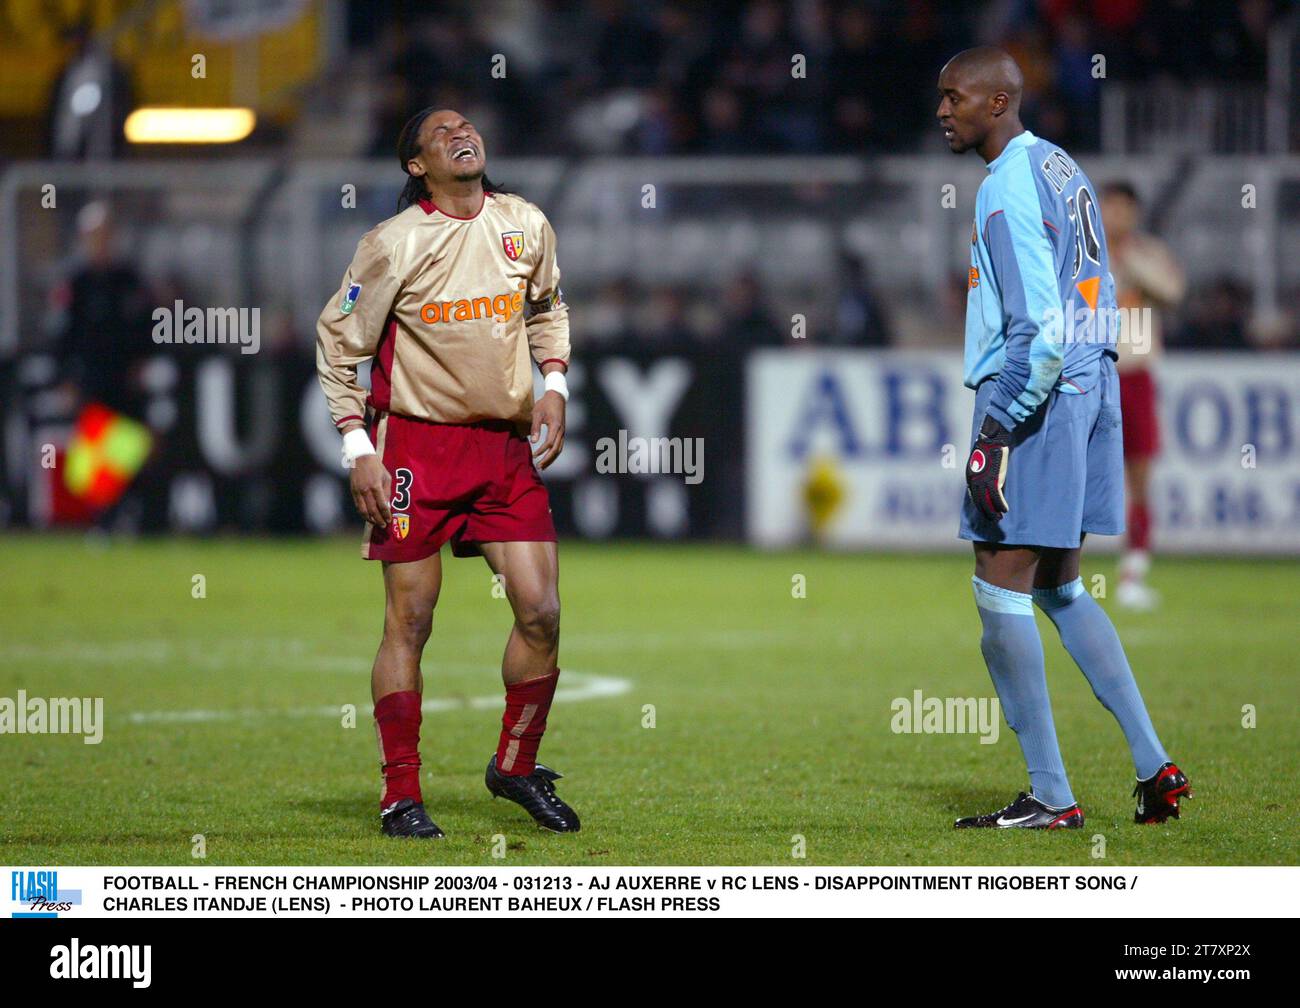 FOOTBALL - FRENCH CHAMPIONSHIP 2003/04 - 031213 - AJ AUXERRE v RC LENS - DISAPPOINTMENT RIGOBERT SONG / CHARLES ITANDJE (LENS) - PHOTO LAURENT BAHEUX / FLASH PRESS Stock Photo